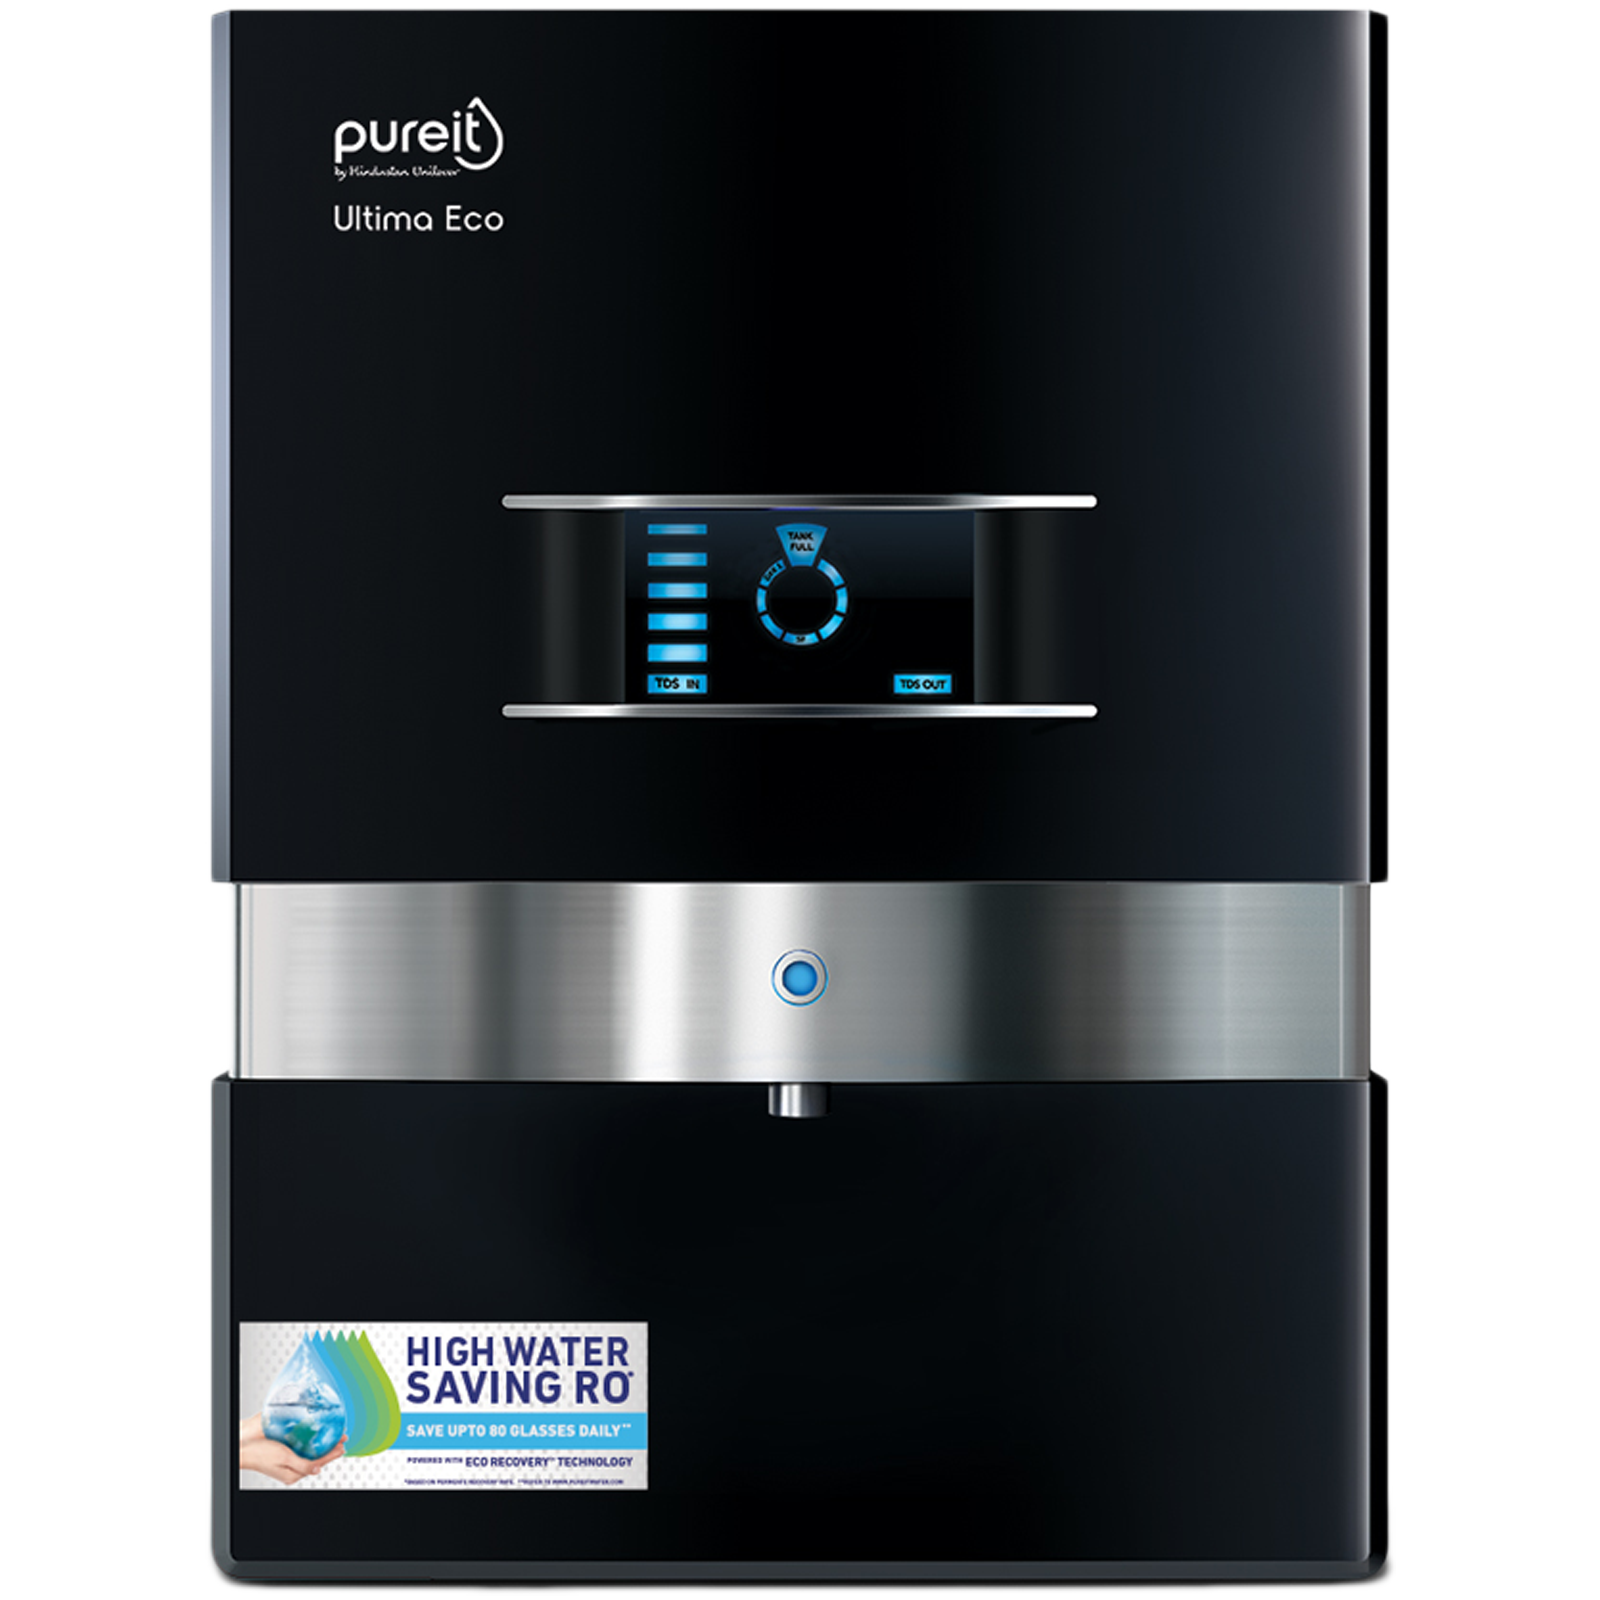 Pureit Ultima Eco Mineral RO+UV+MF Electrical Water Purifier (7 Stage Filtration, WDRJ400, Black)